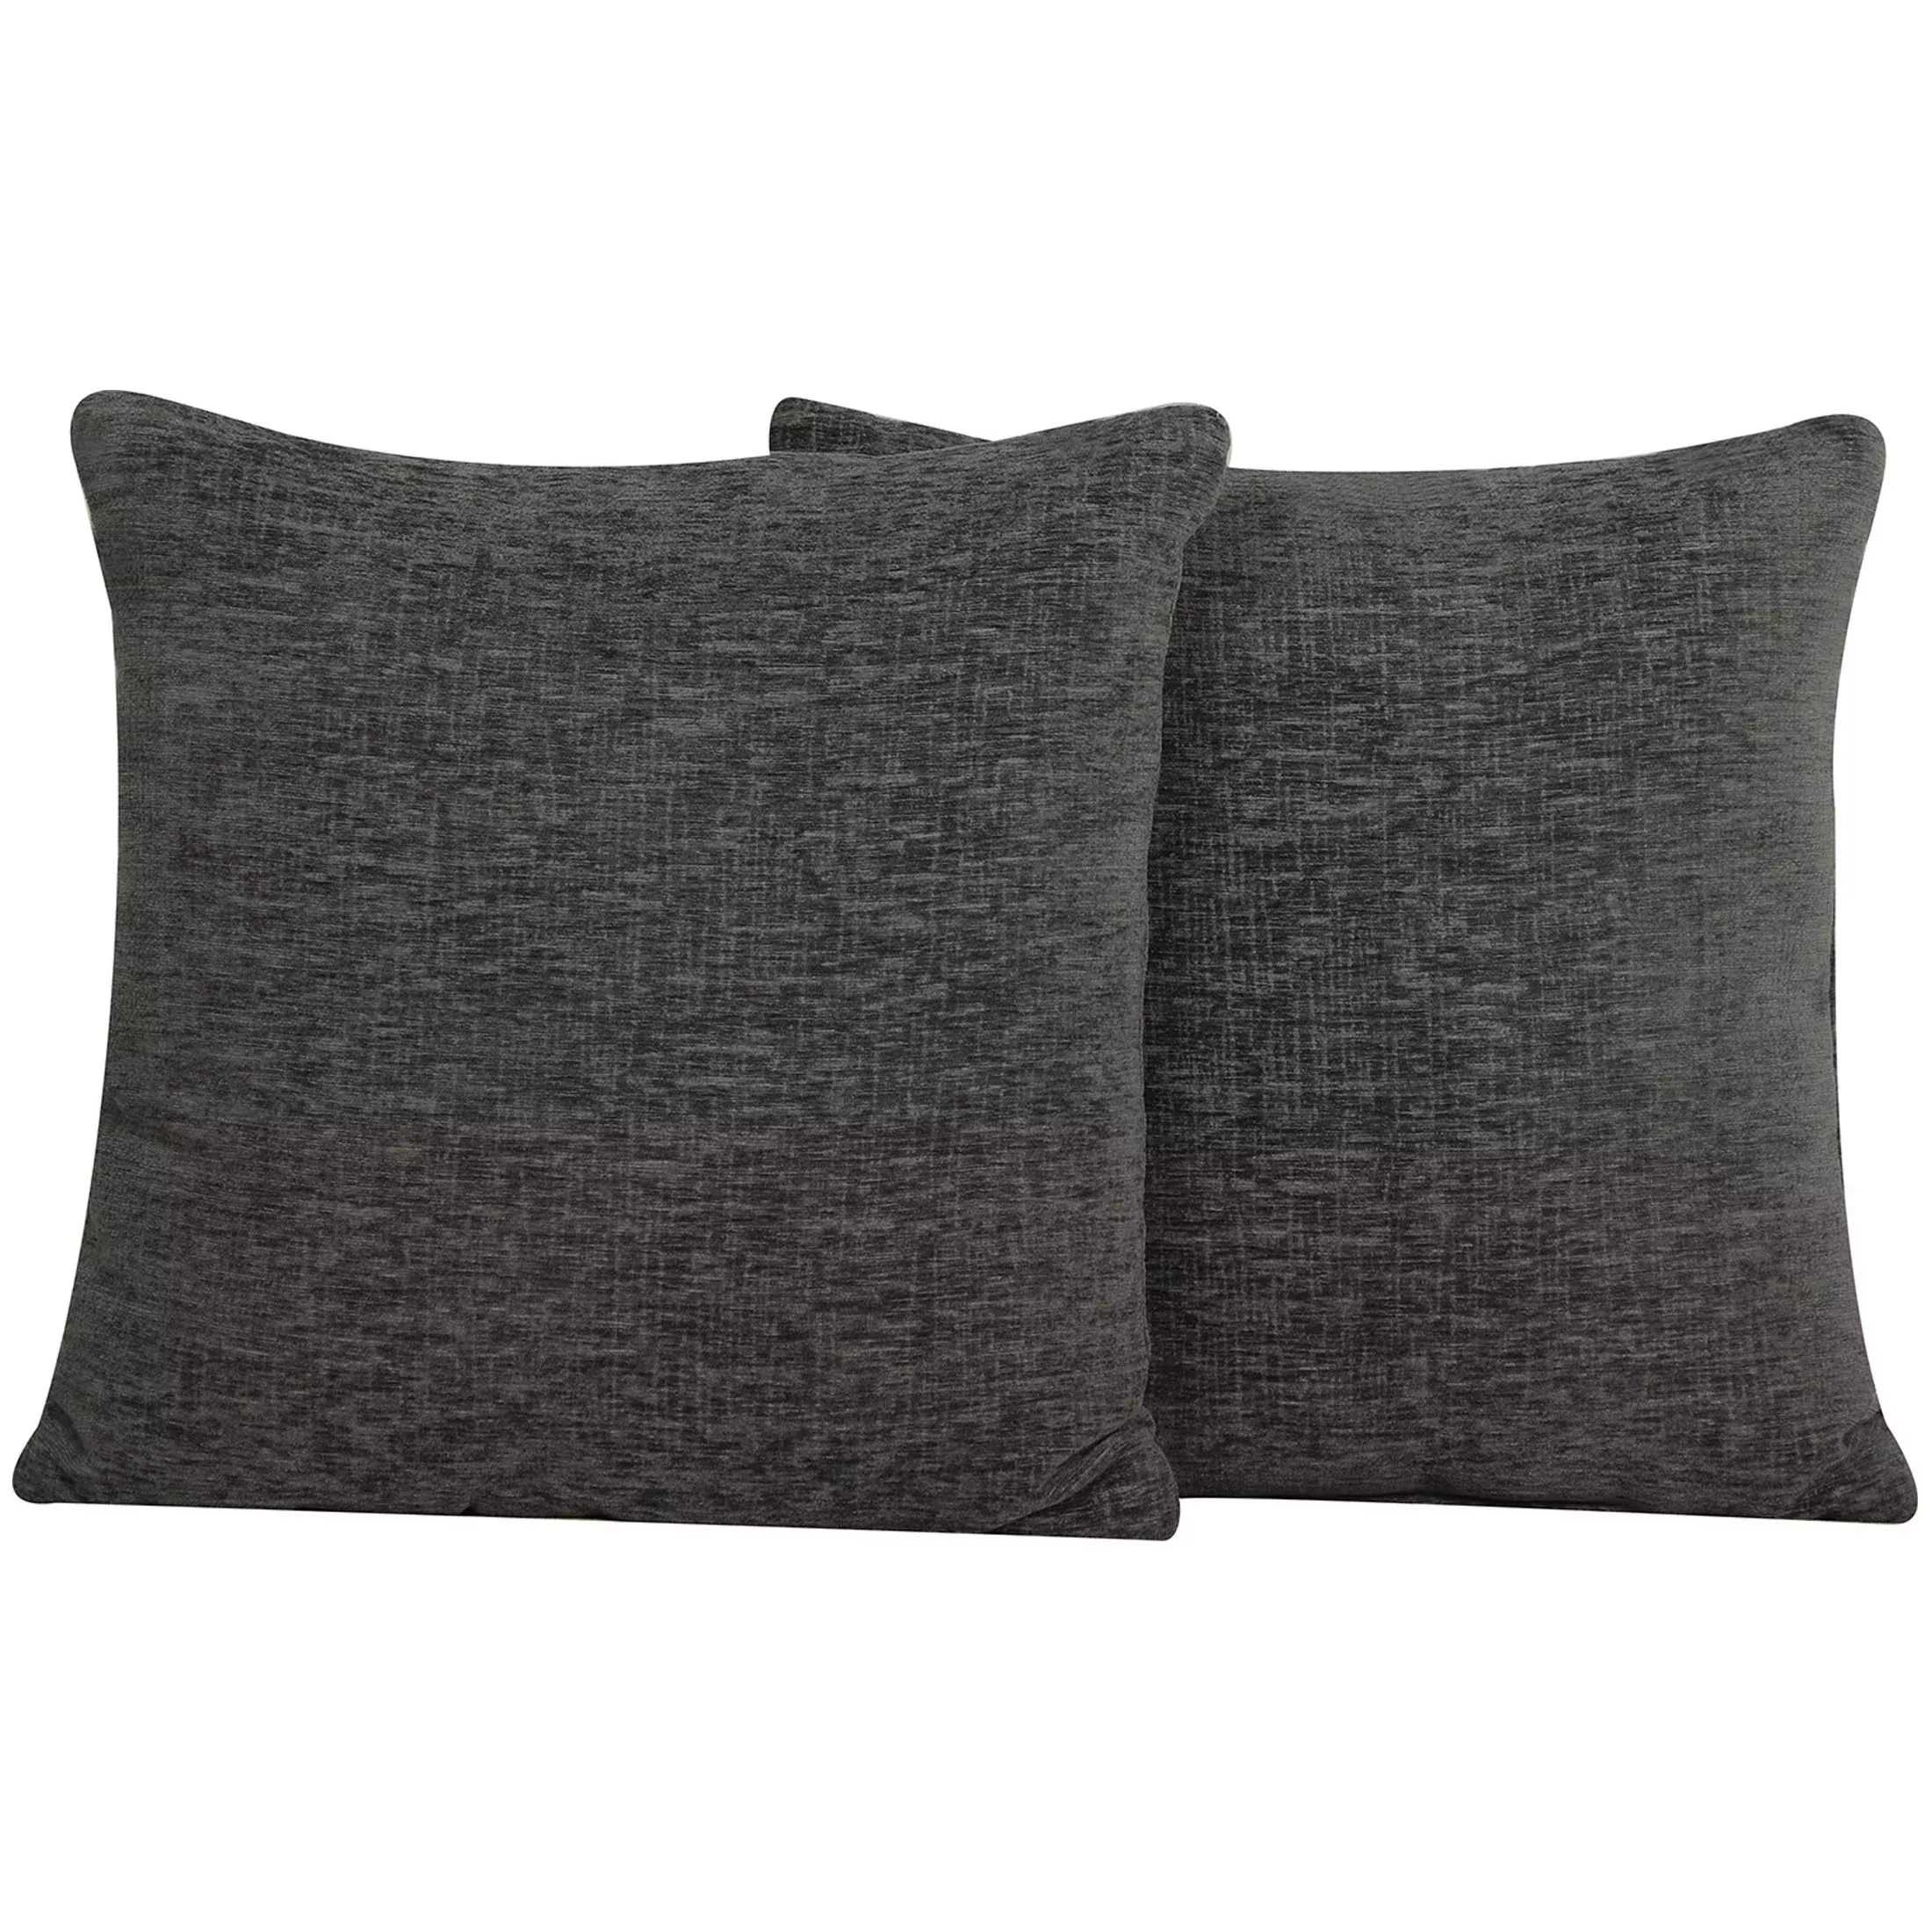 Navy Solid Chenille Decorative Pillow Set, Mainstays, 18 x 18, 2